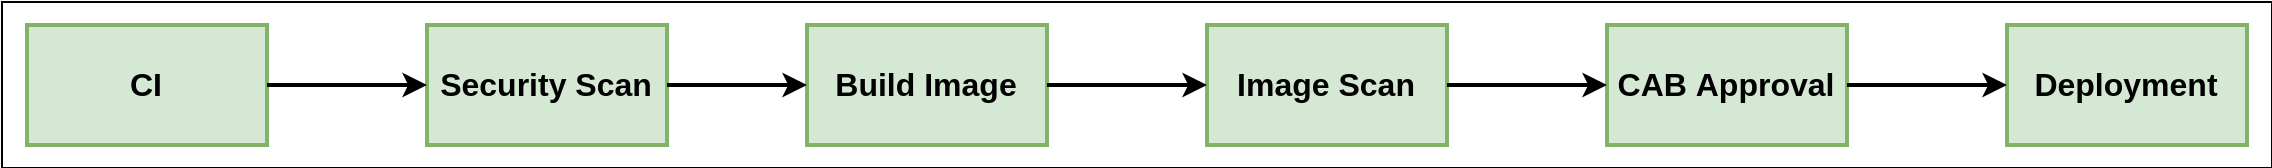 An example path to production flow chart